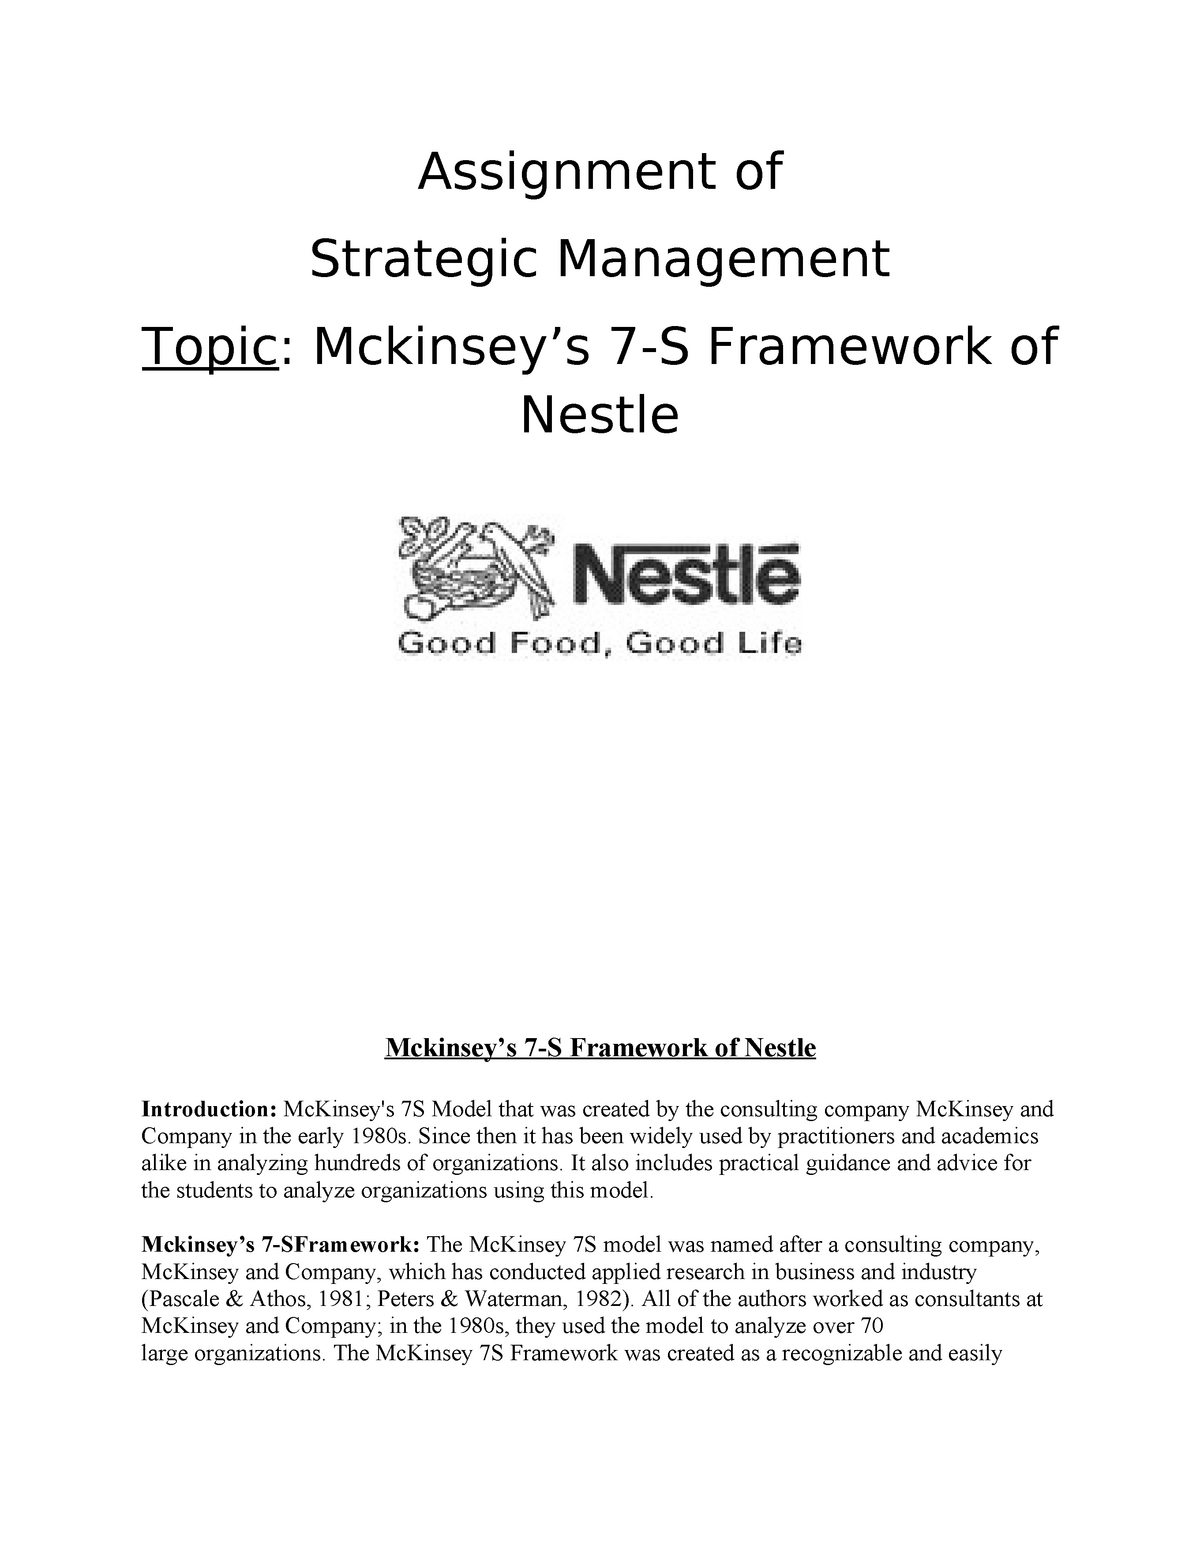 nestle hrm assignment